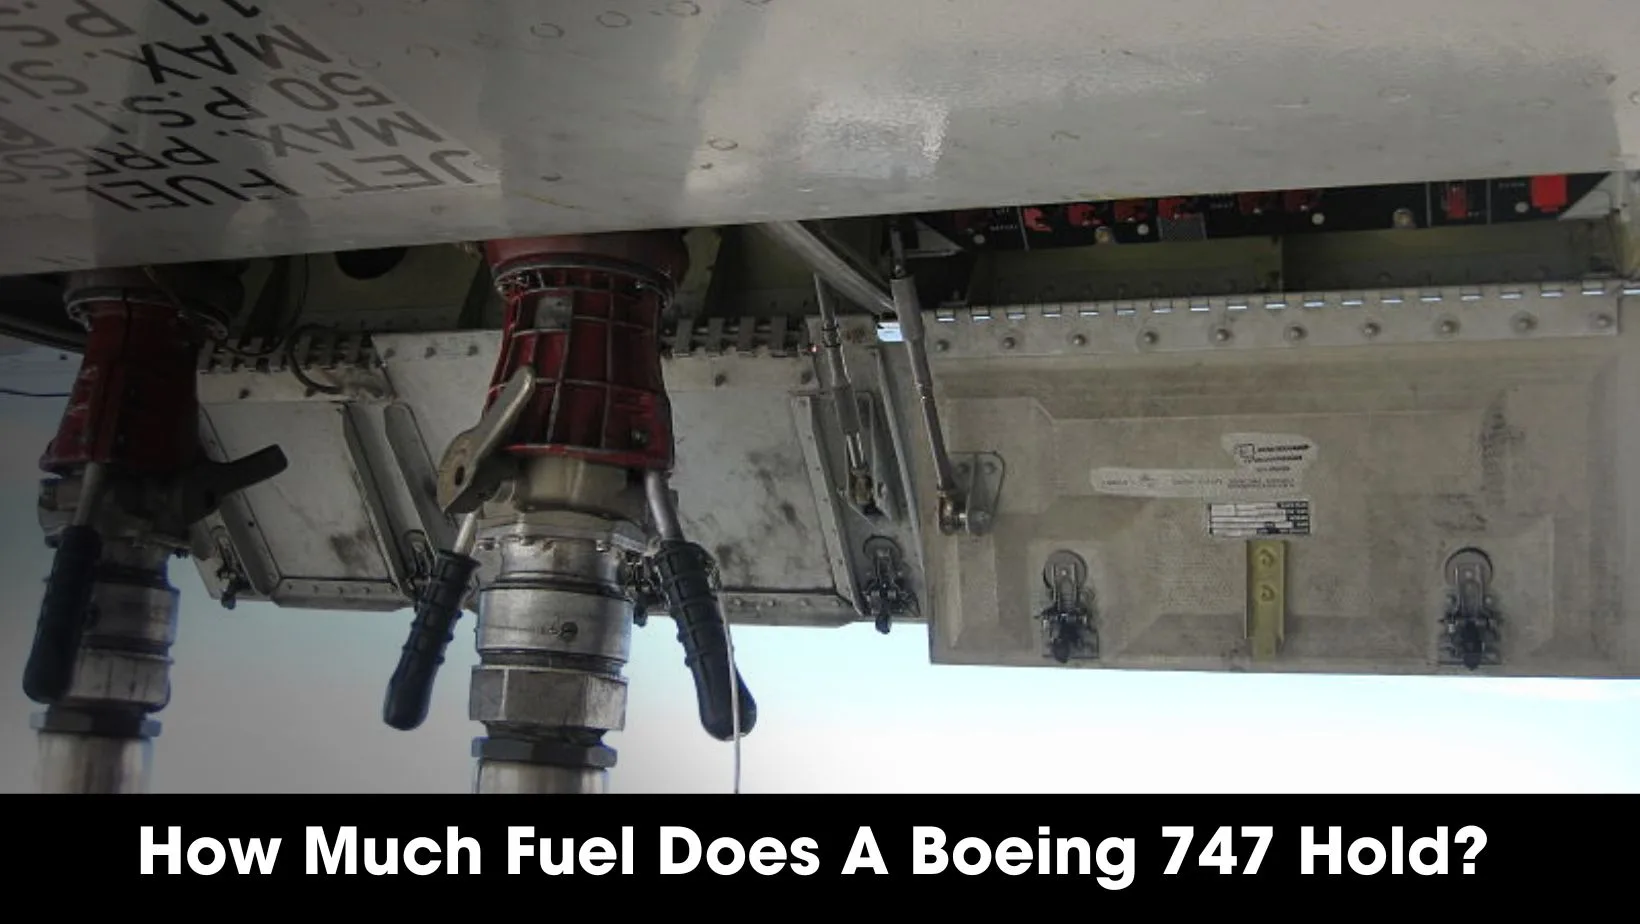 How Much Fuel Does A Boeing 747 Hold?